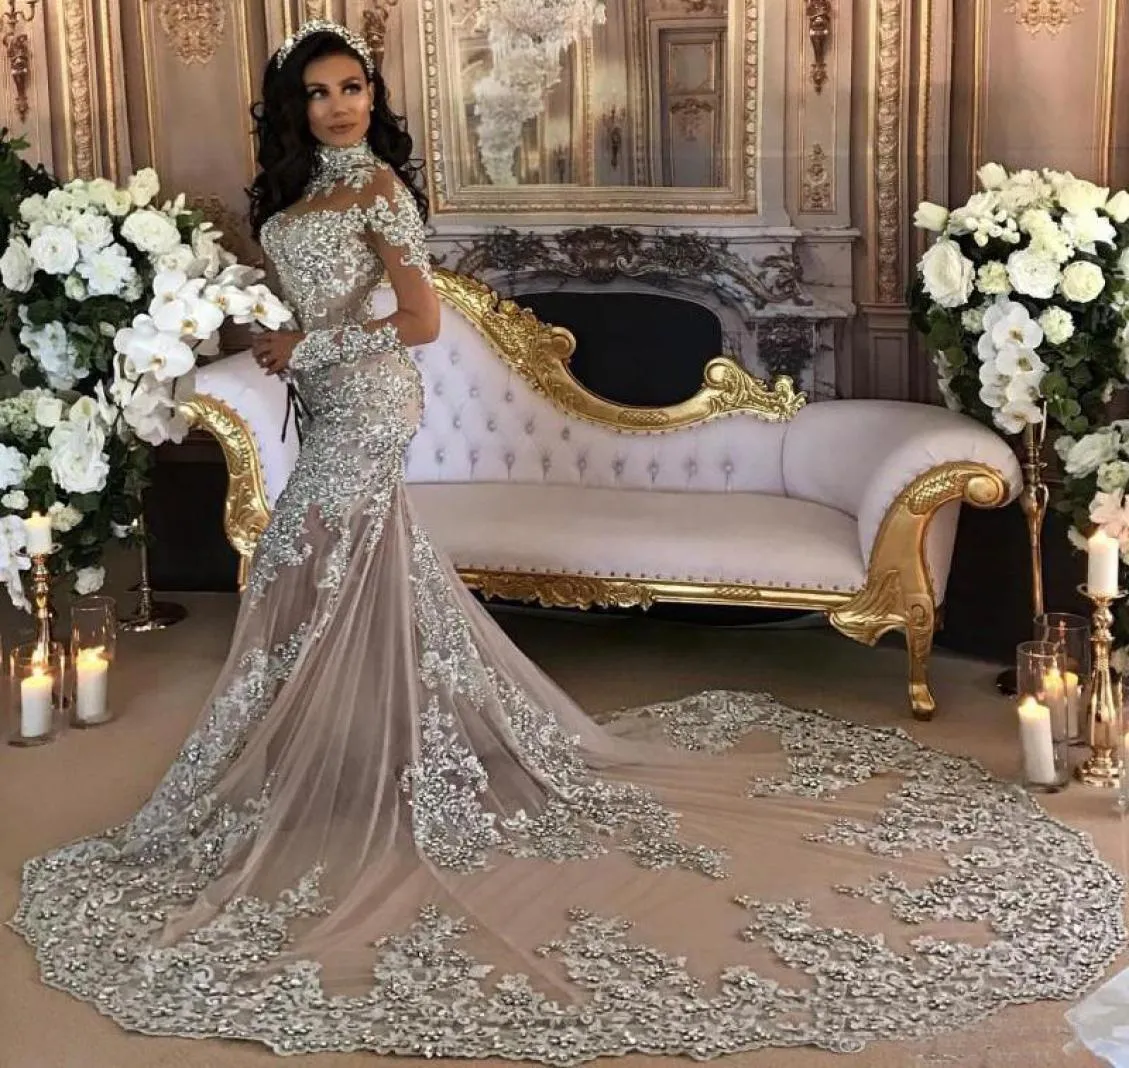 Sparkly Bling 2019 Wedding Dress Luxury Beaded Lace Applique High Neck Illusion Long Sleeve Silver Mermaid Chapel Bridal Gowns3936733